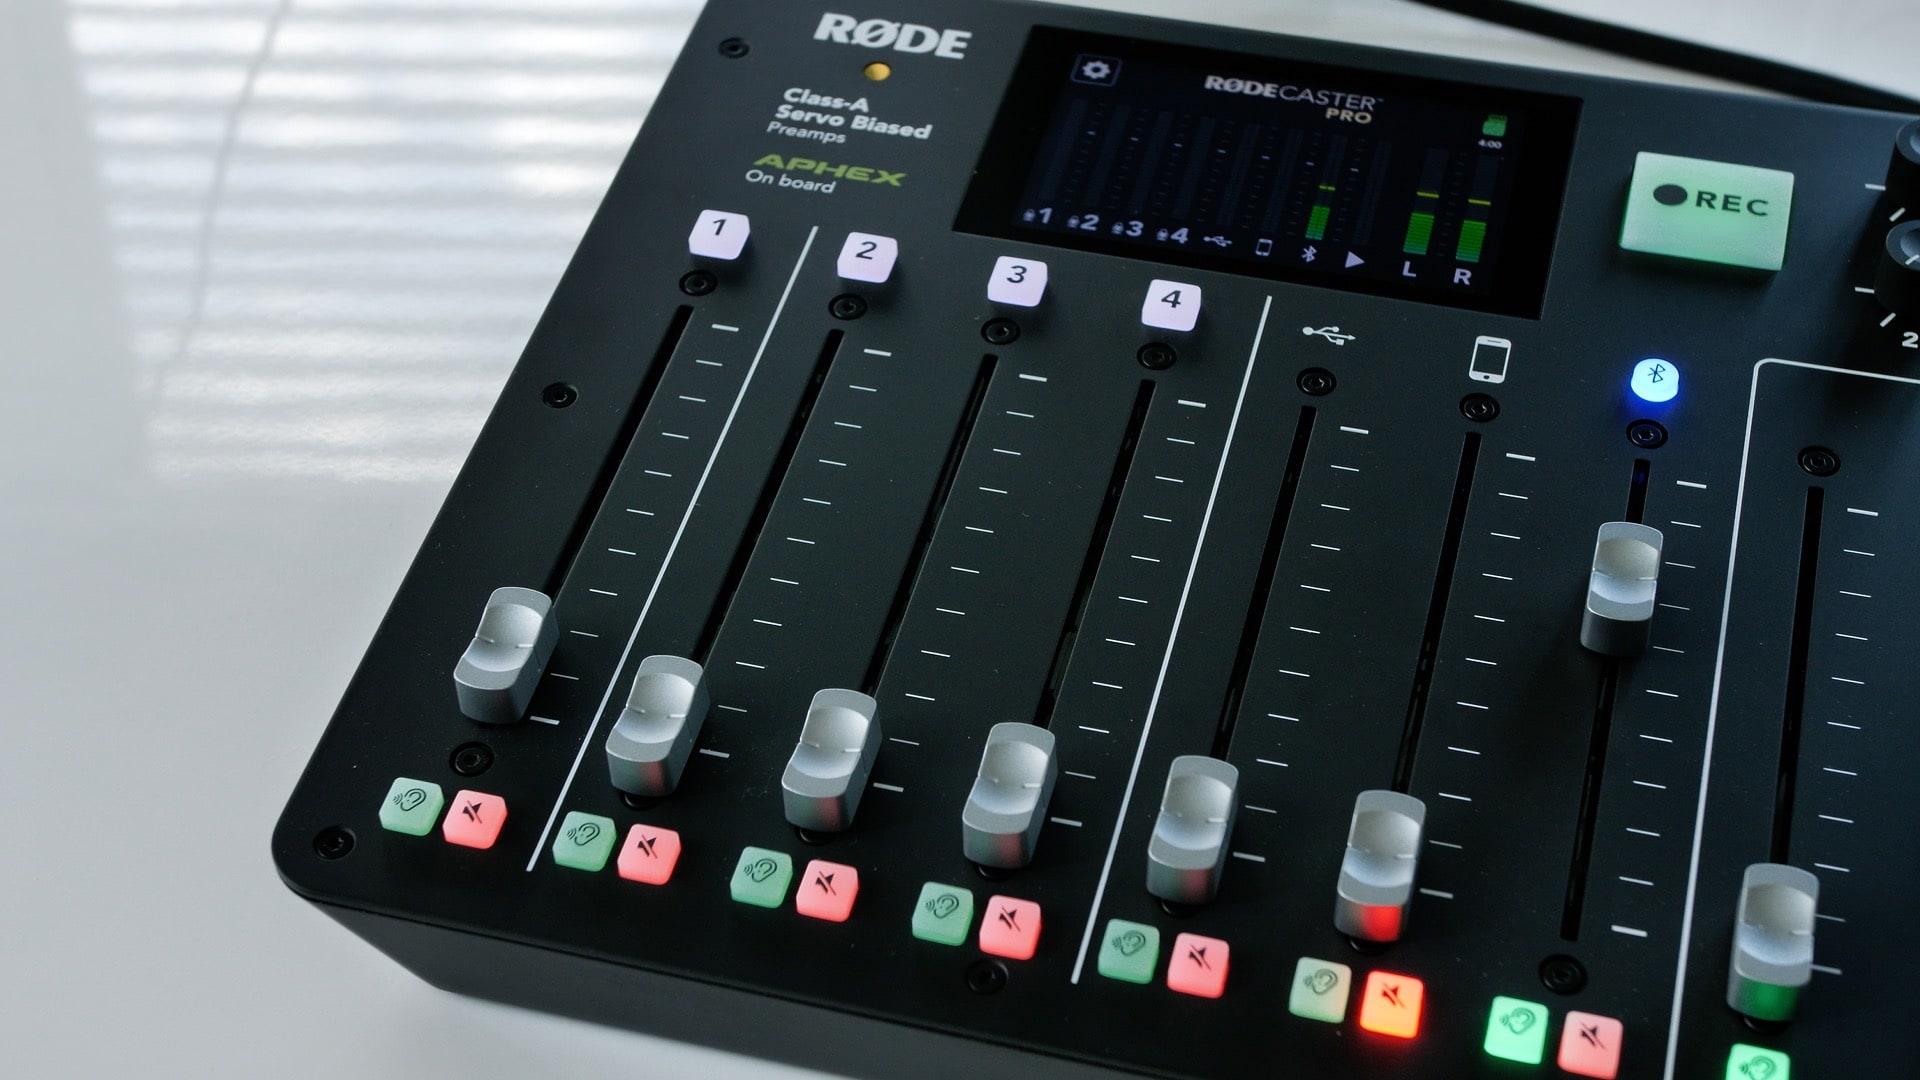 I've spent seven years testing podcasting gear. Here are my current favorites, including the RodeCaster Pro. Plus, get some bonus podcasting tips.